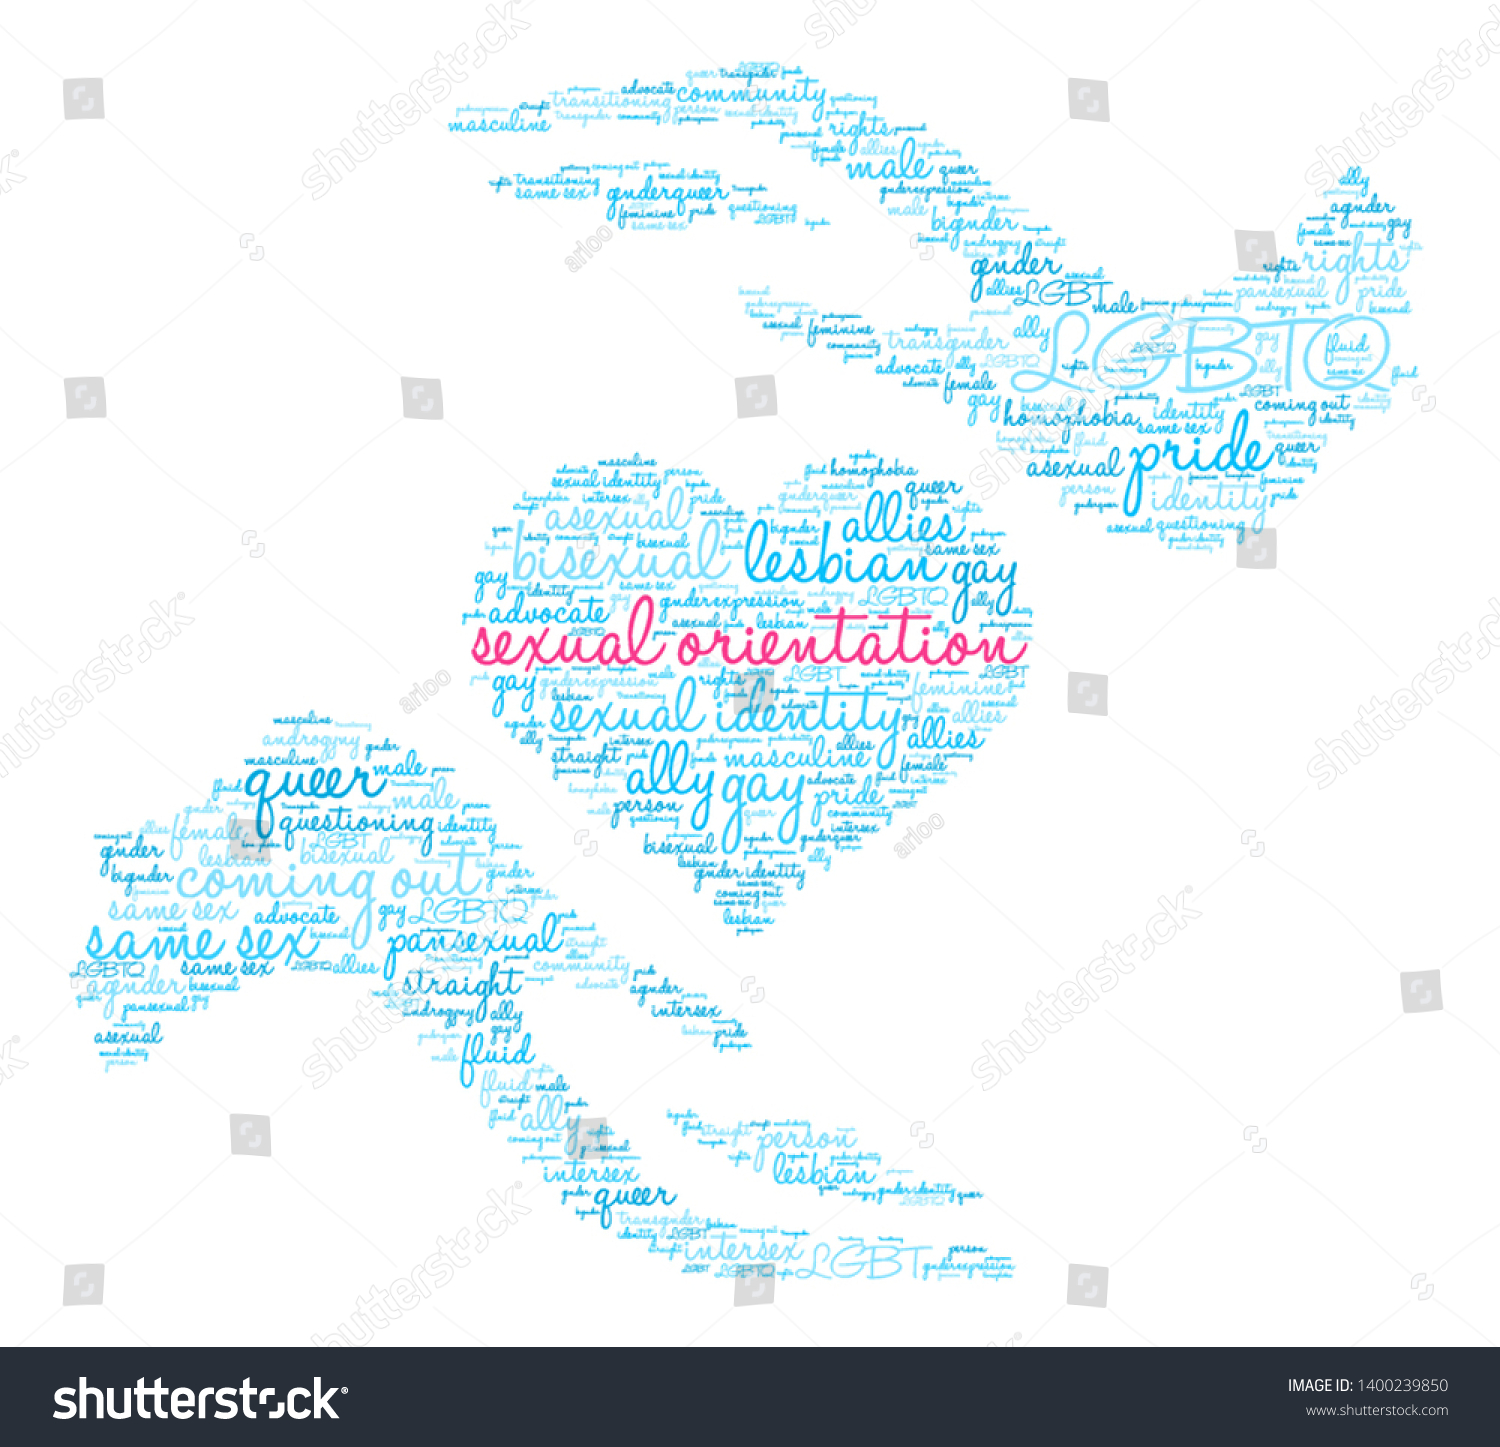 Sexual Orientation Word Cloud On White Stock Vector Royalty Free 1400239850 Shutterstock 8347